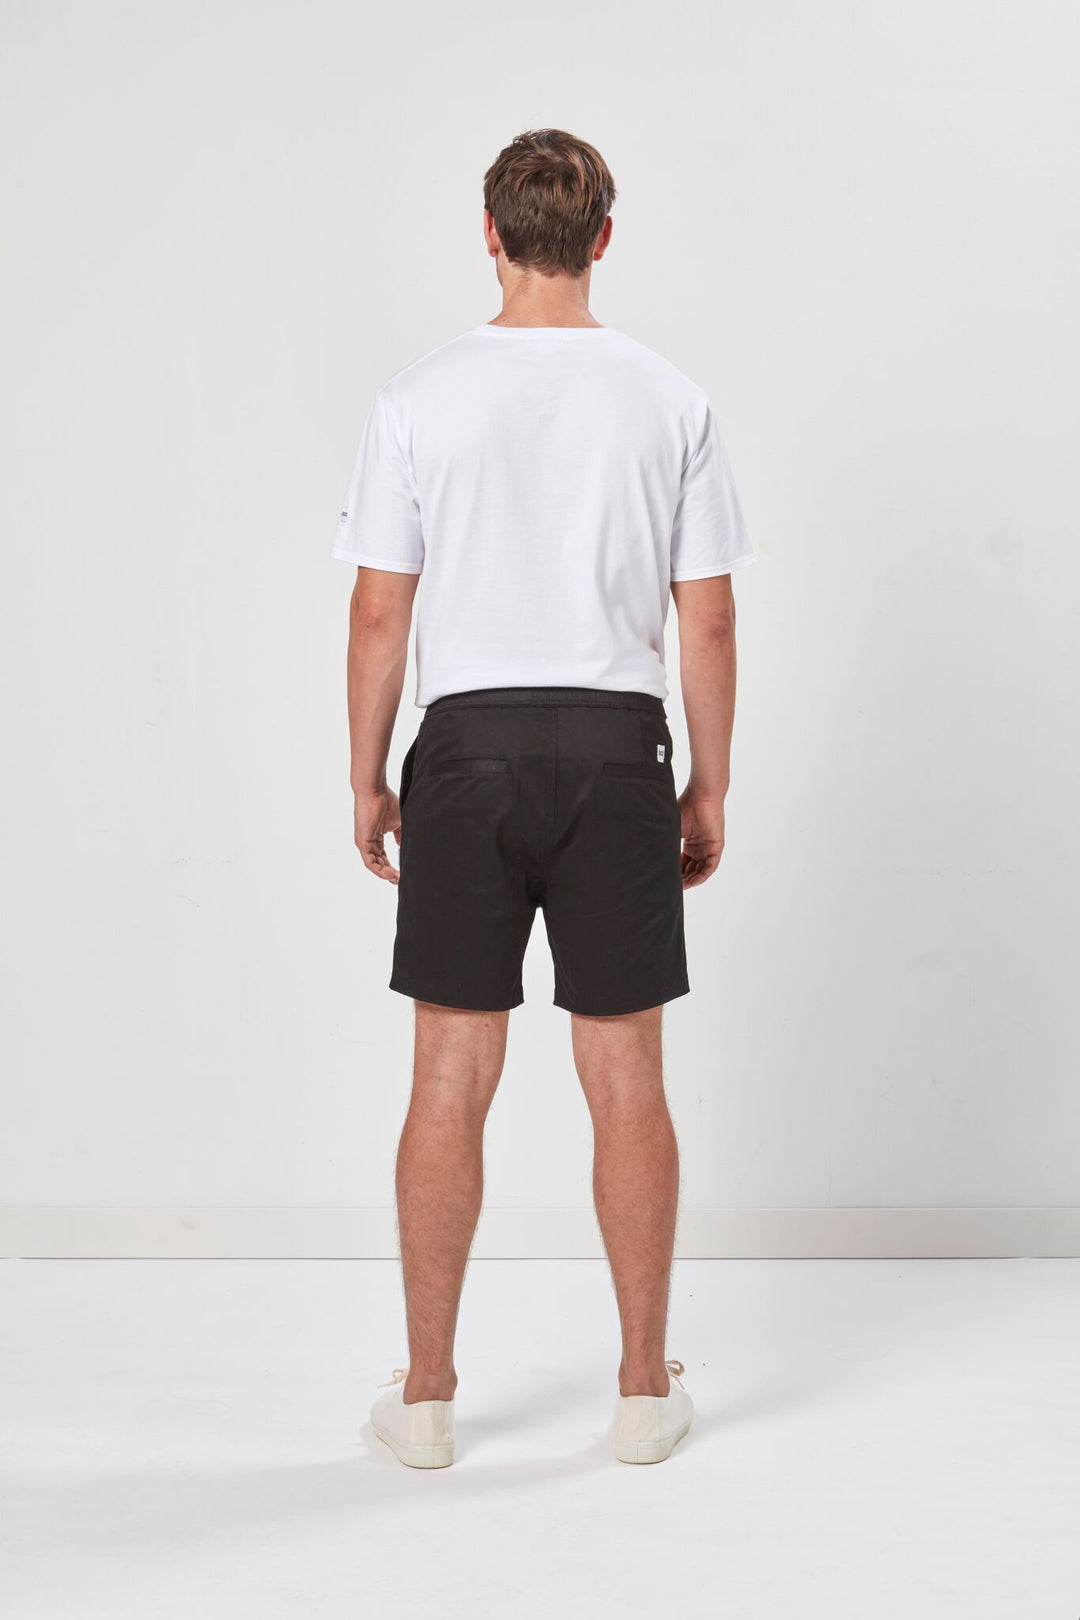 Diaz Chino Short | Black - West of Camden - Main Image Number 2 of 3